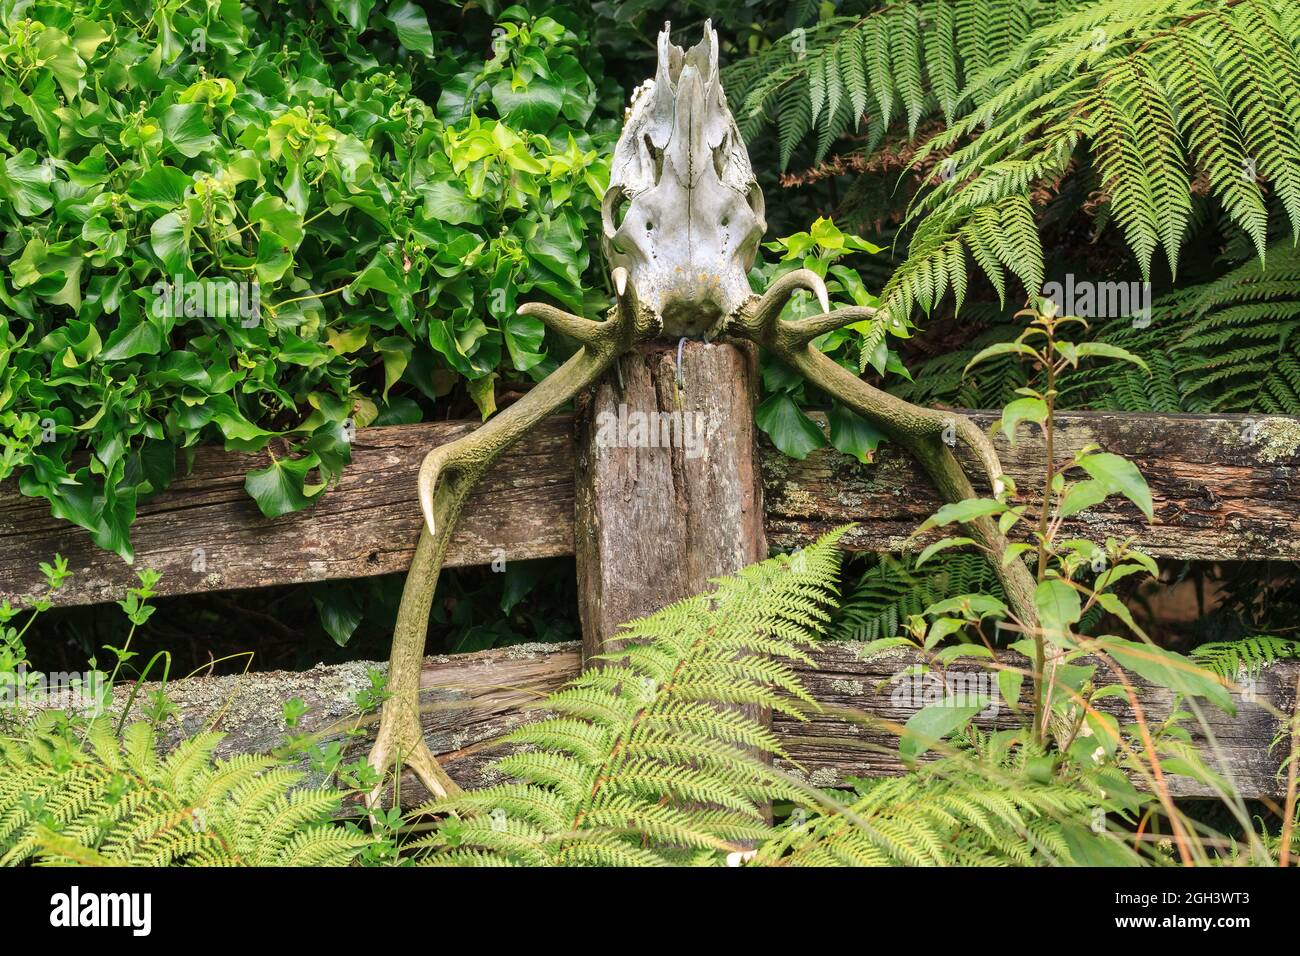 The skull and antlers of a deer left on a fence post as a trophy or decoration Stock Photo